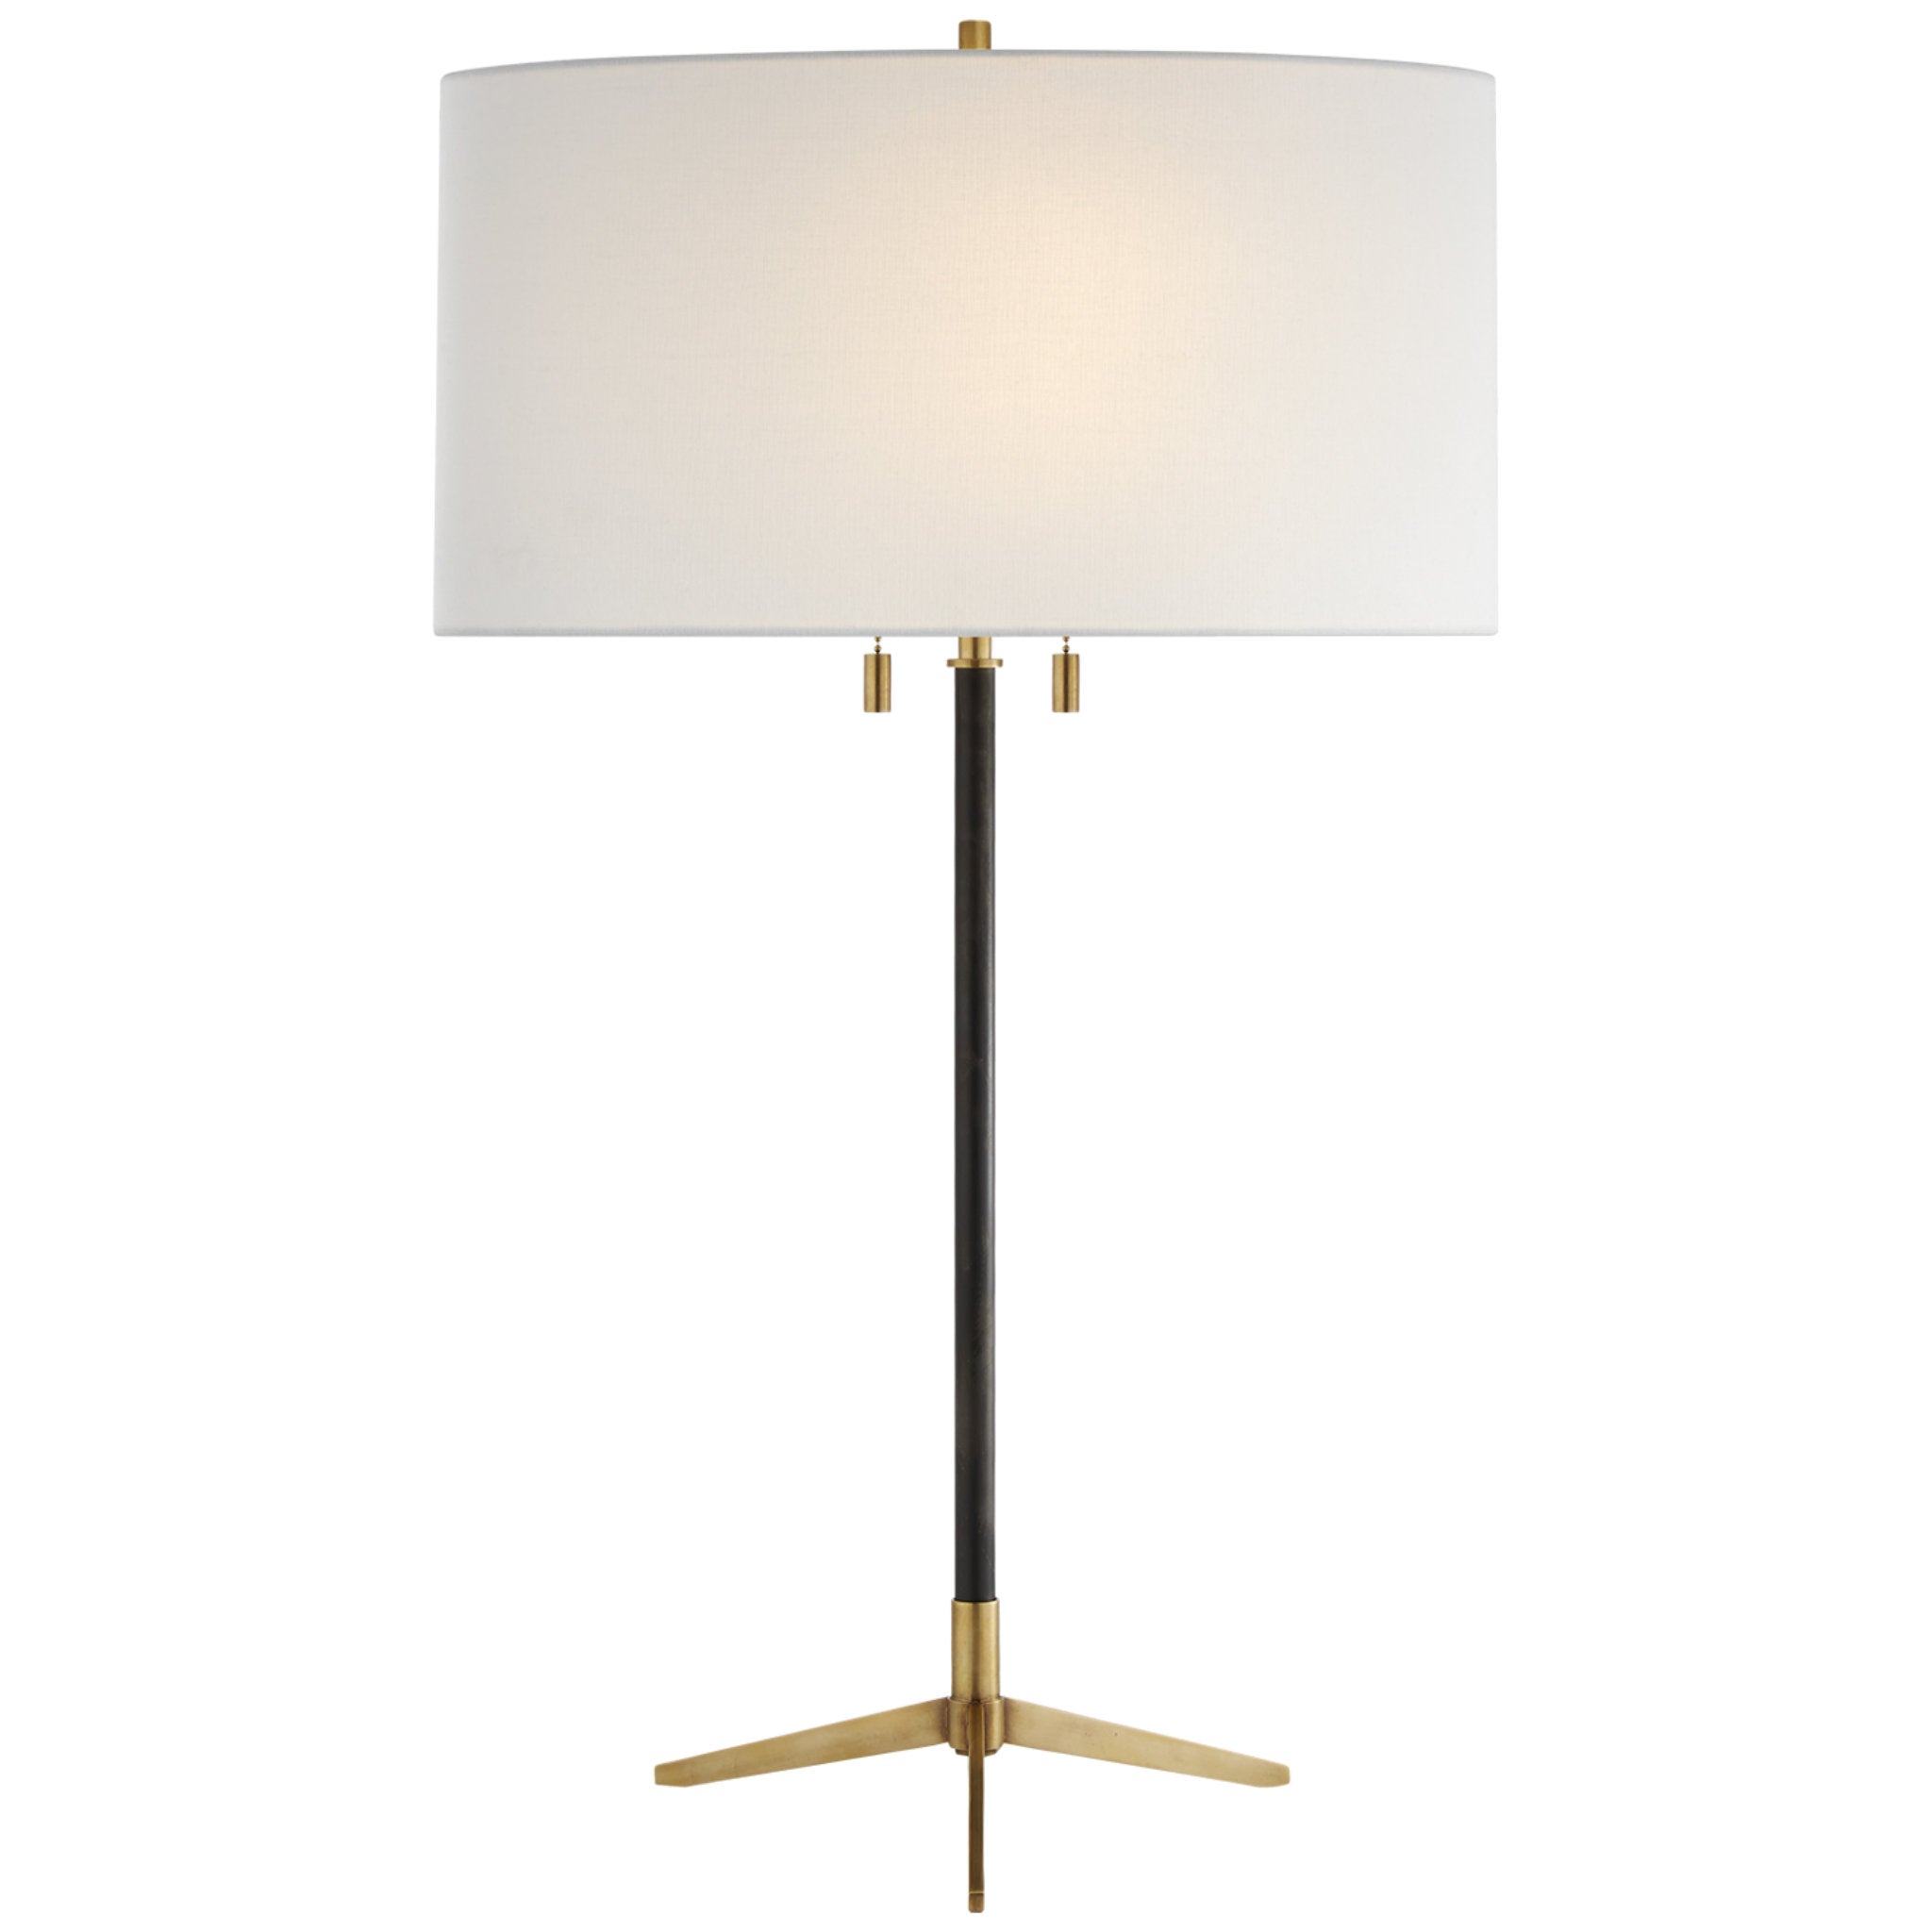 Thomas O'Brien Caron Table Lamp in Bronze and Hand-Rubbed Antique Brass with Linen Shade